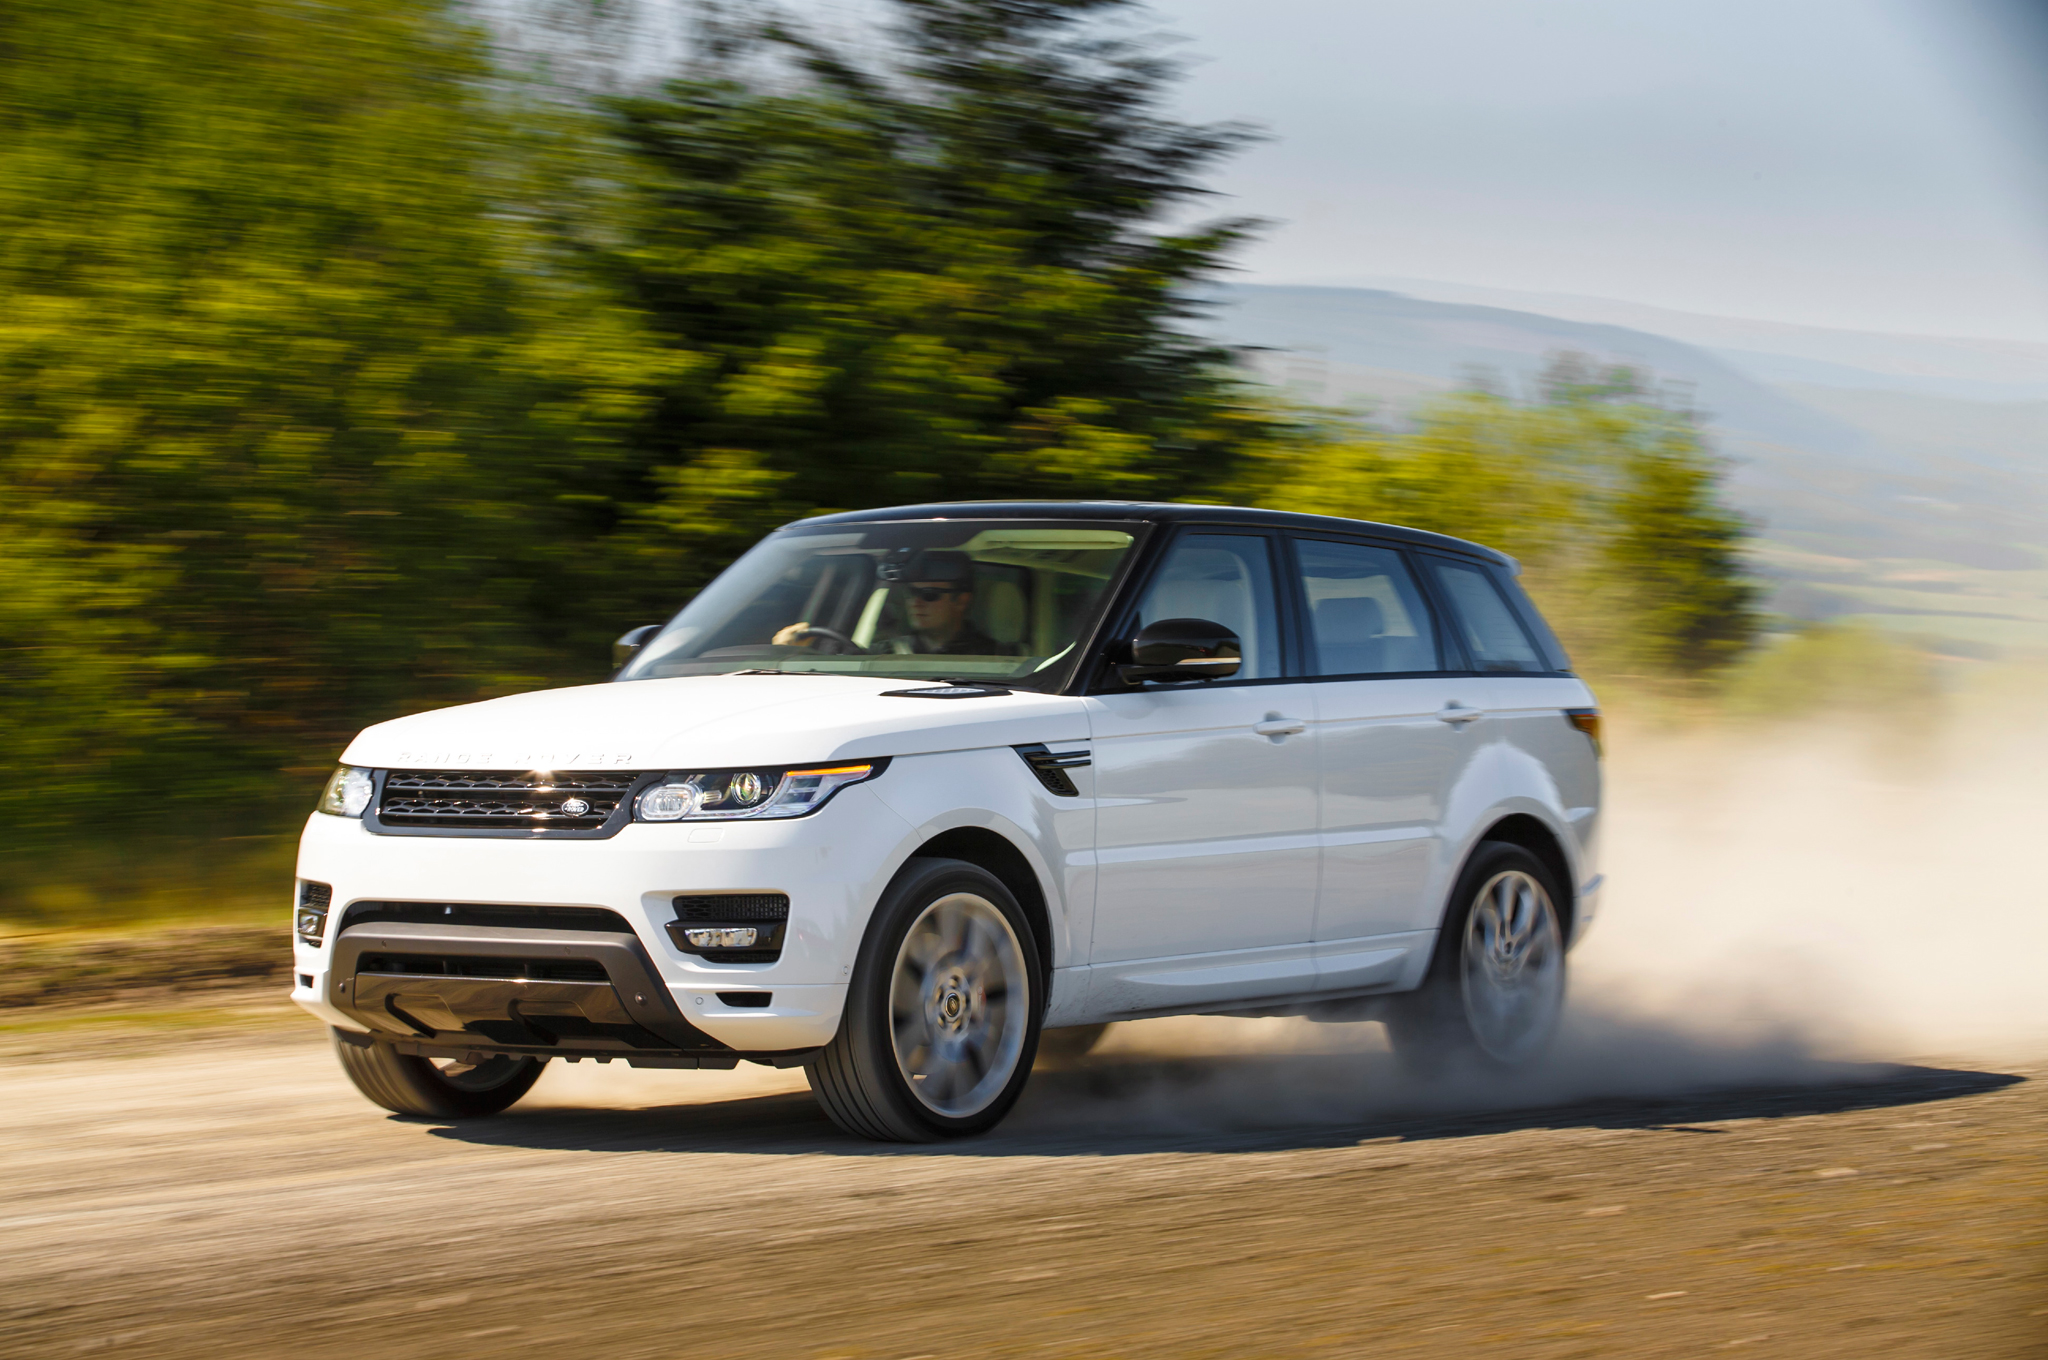 2014 Land Rover Range Rover Sport Photos, Informations, Articles ...